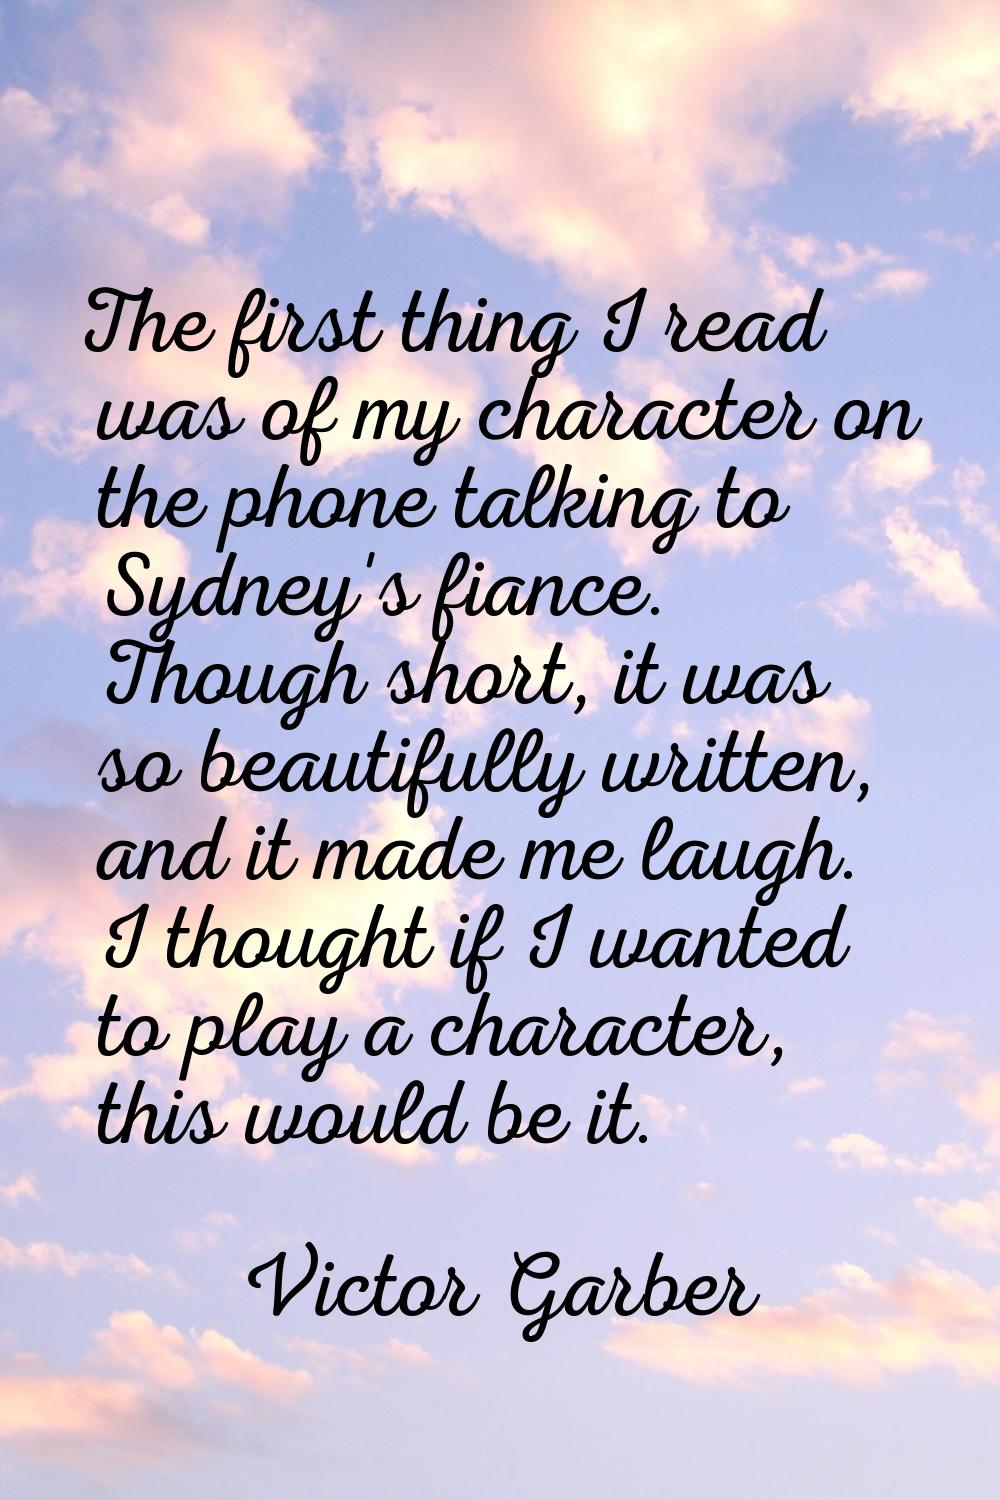 The first thing I read was of my character on the phone talking to Sydney's fiance. Though short, i